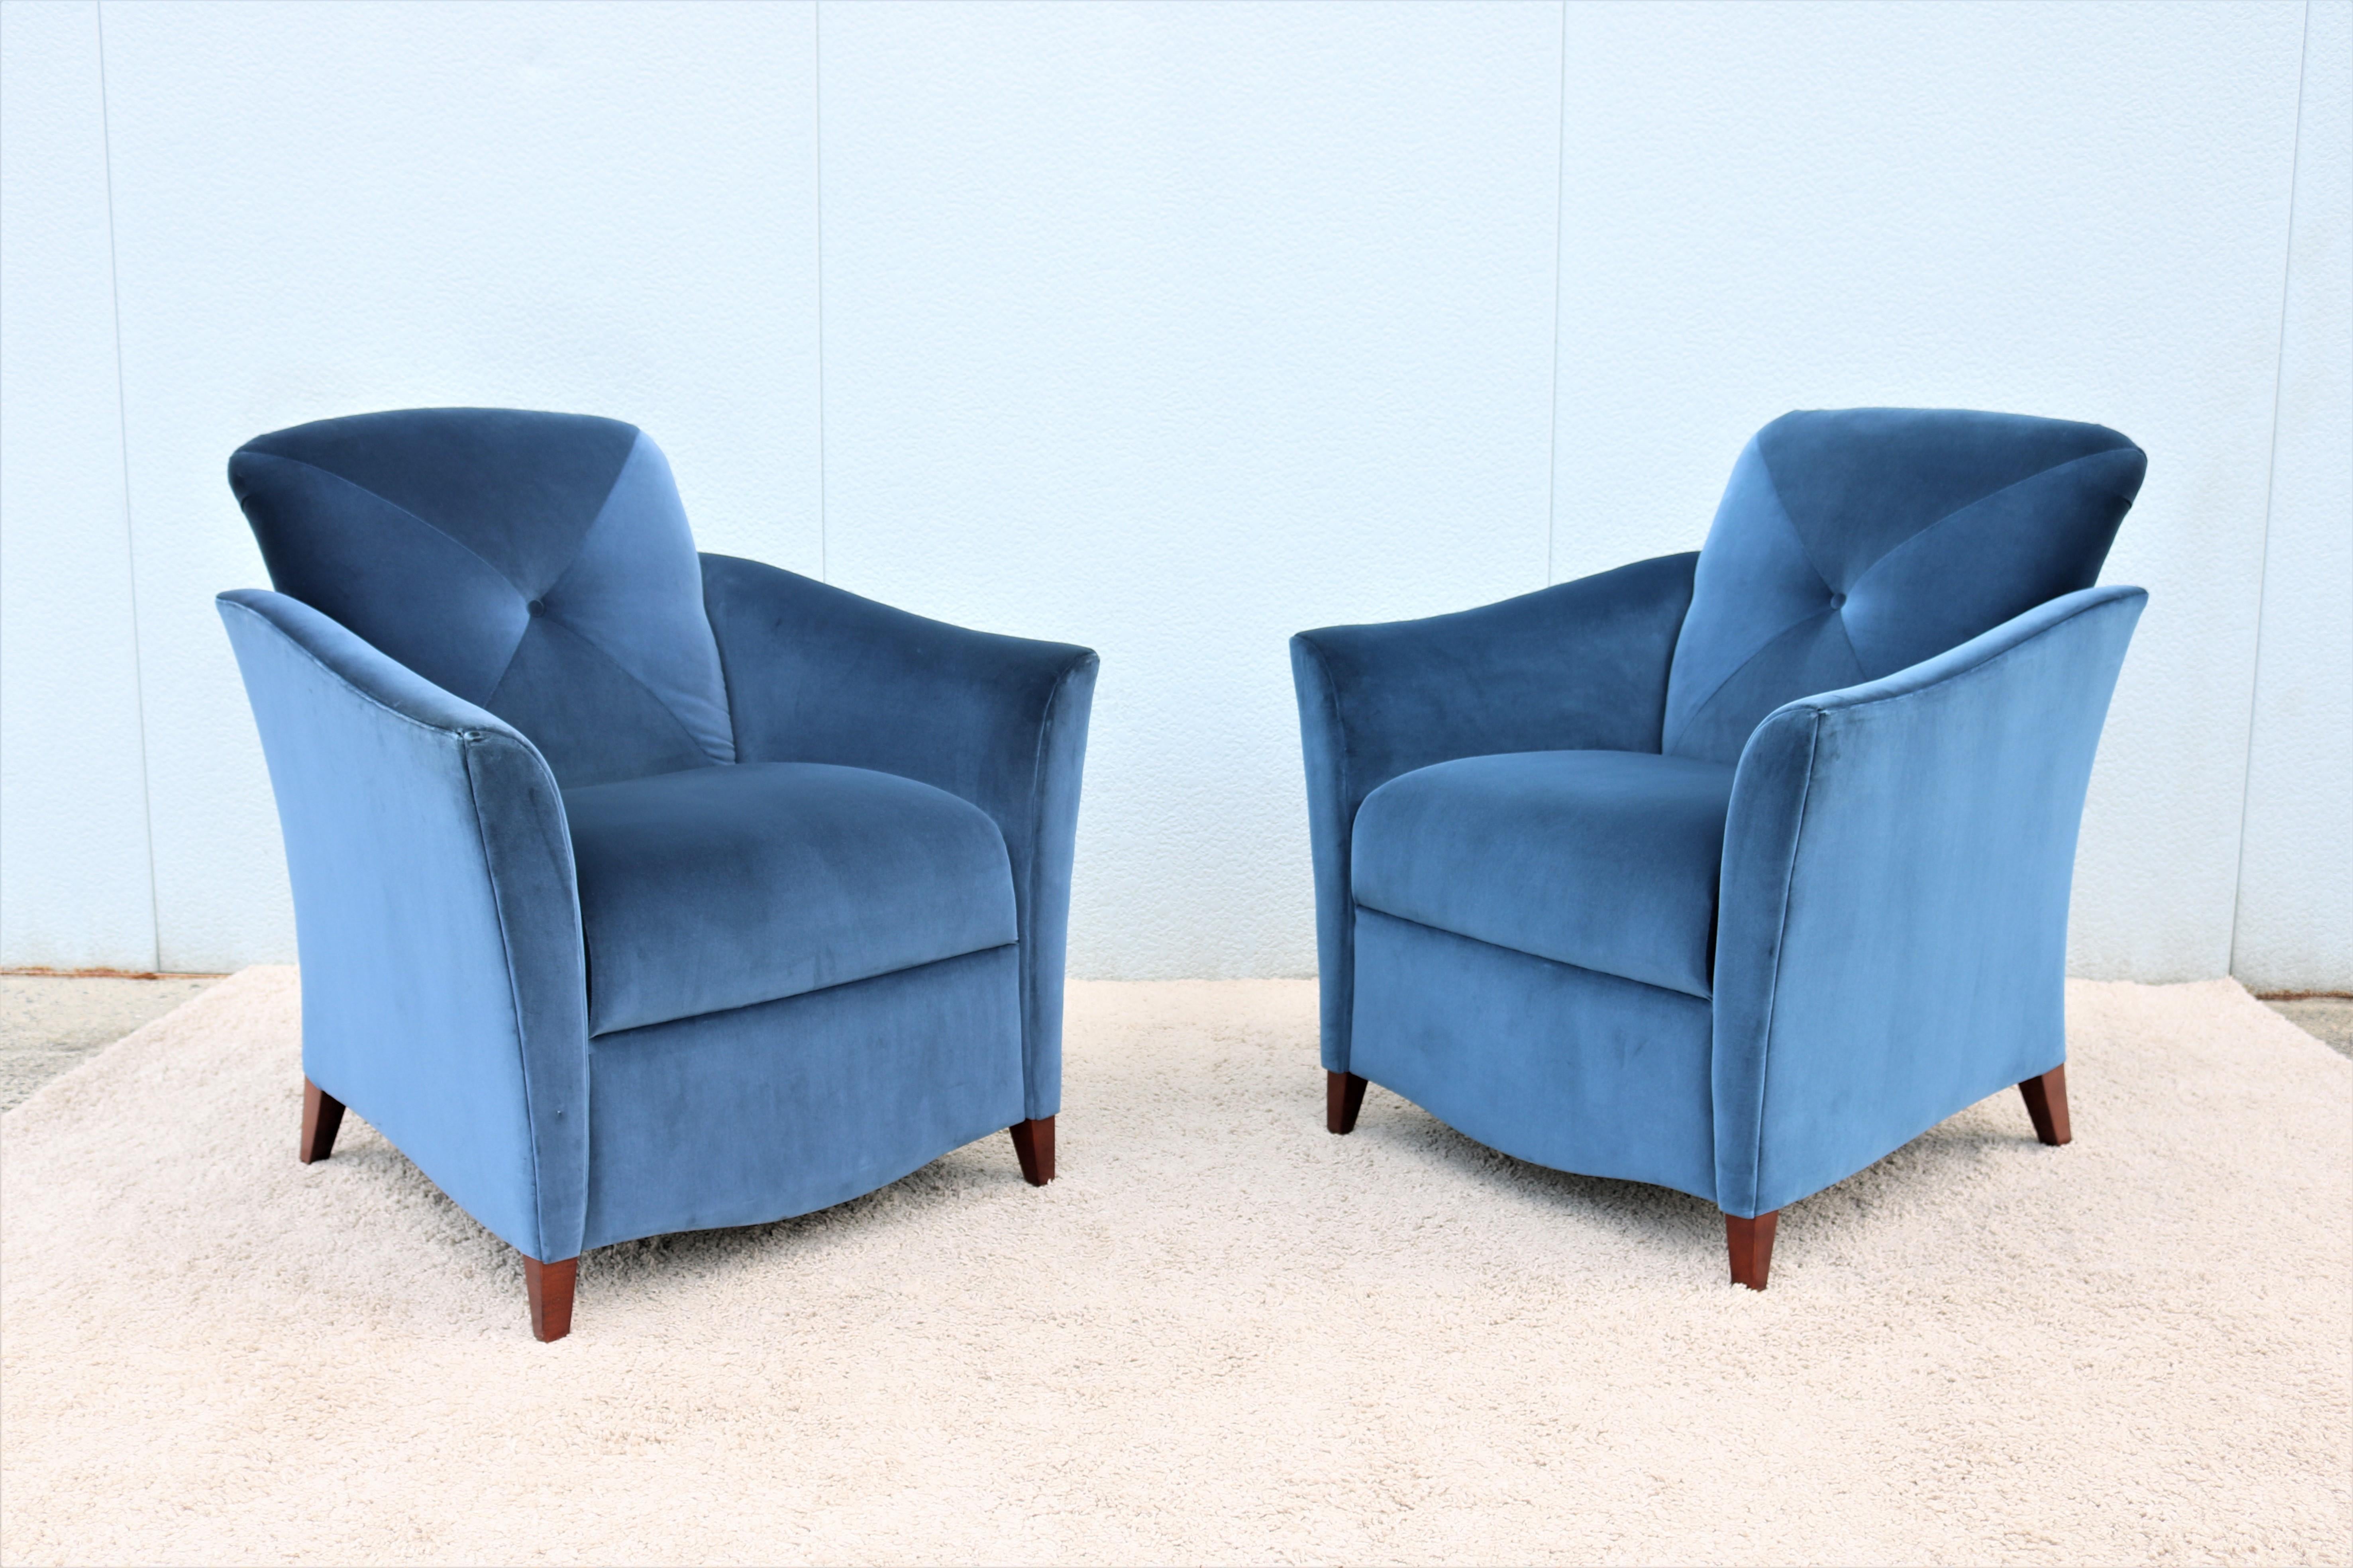 This fabulous Art Deco style Portrait lounge chairs are handcrafted with finest quality materials and craftmanship by Jofco.
Features a perfectly curved design and gently reclined back for exceptional comfort. 
Its distinctive curves allow it to